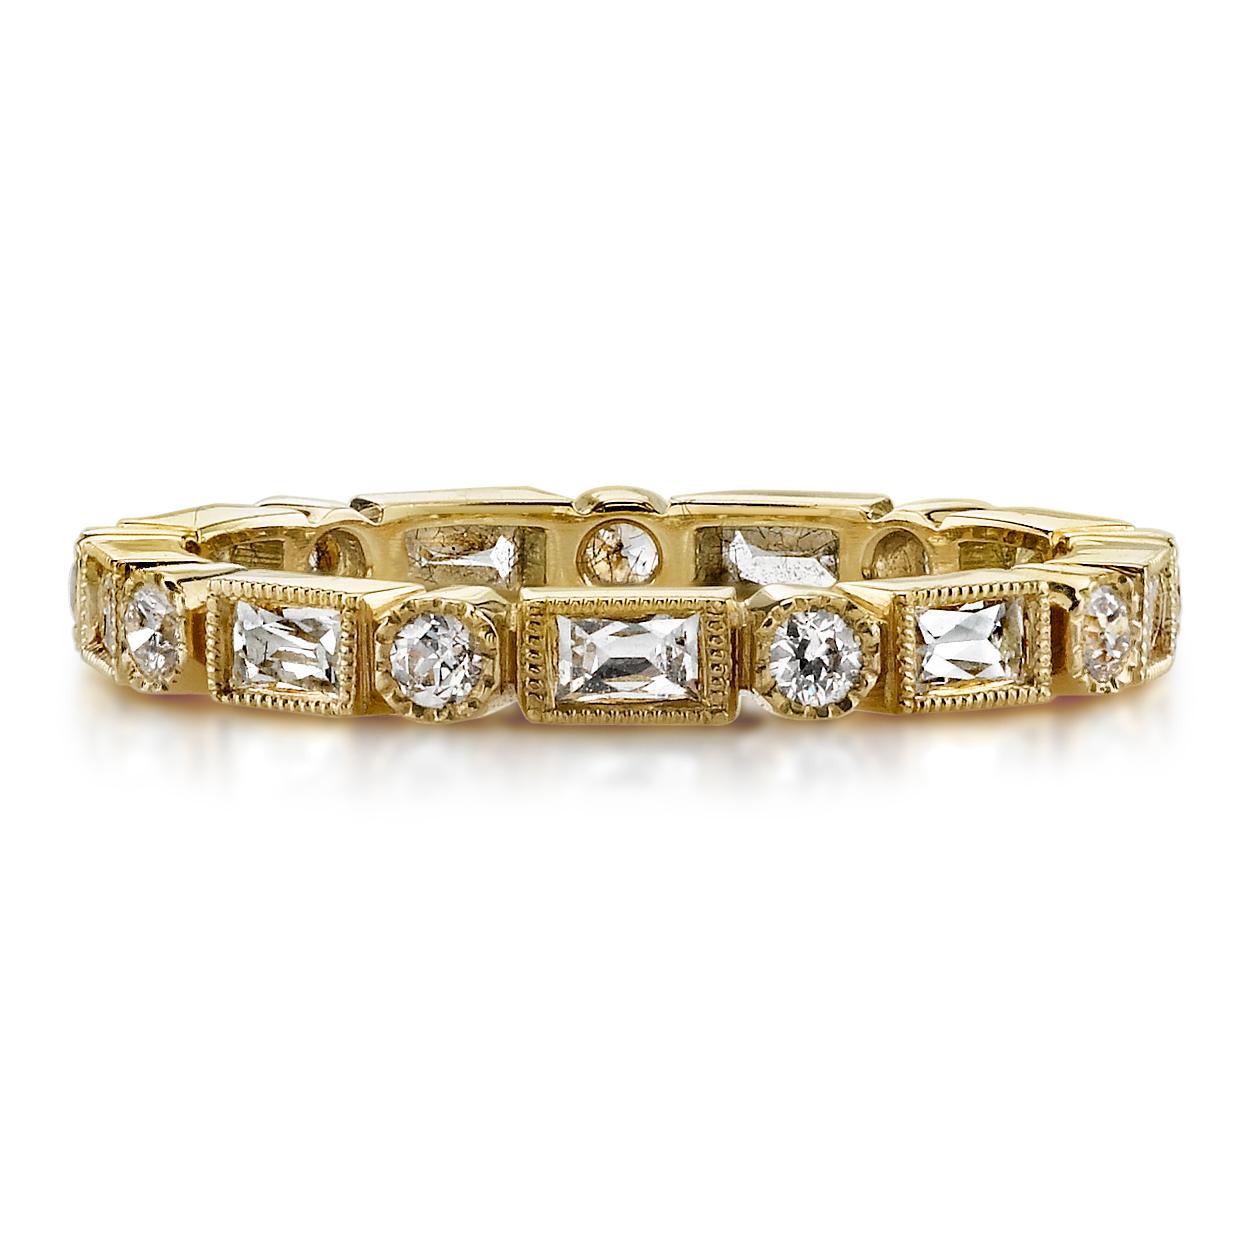 Approximately 1.05tw old European and French cut diamonds set in a handcrafted eternity band. Price may vary according to total diamond weight. 

Price shown is for 18K gold. 

Please inquire for additional sizes/metal colors.

Our jewelry is made